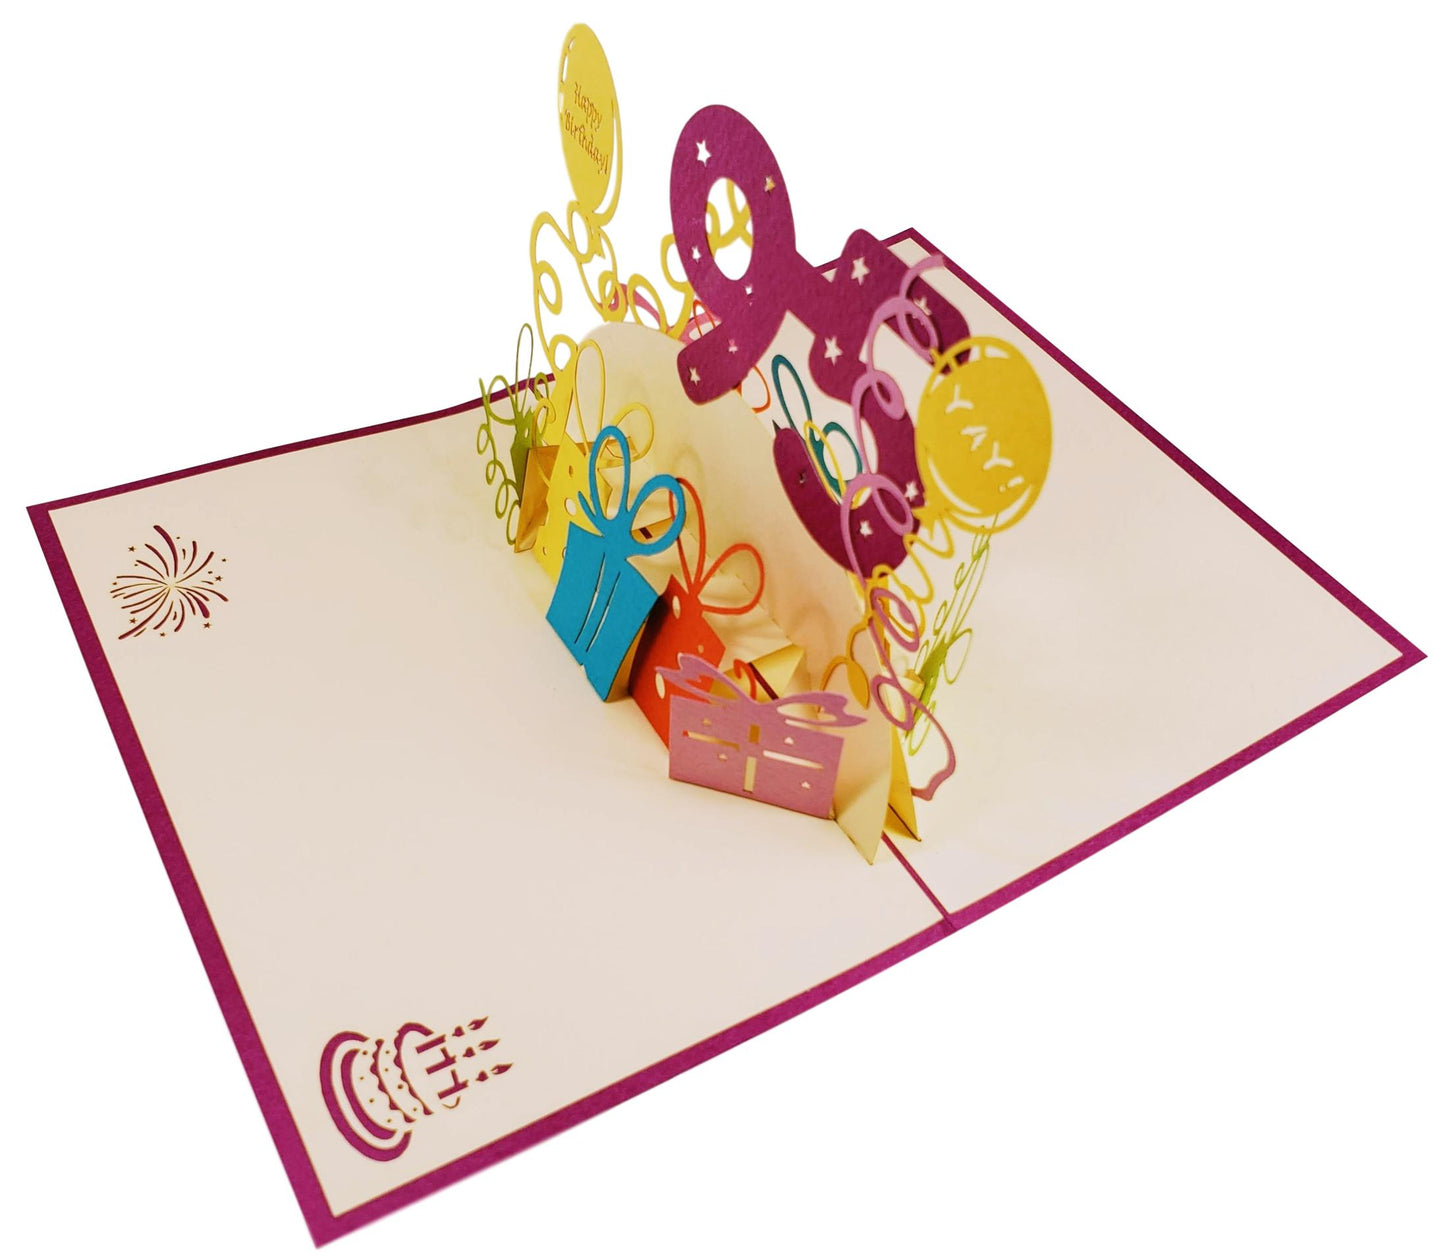 Happy 95th Birthday With Lots of Presents 3D Pop Up Greeting Card - Age - Birthday - iGifts And Cards